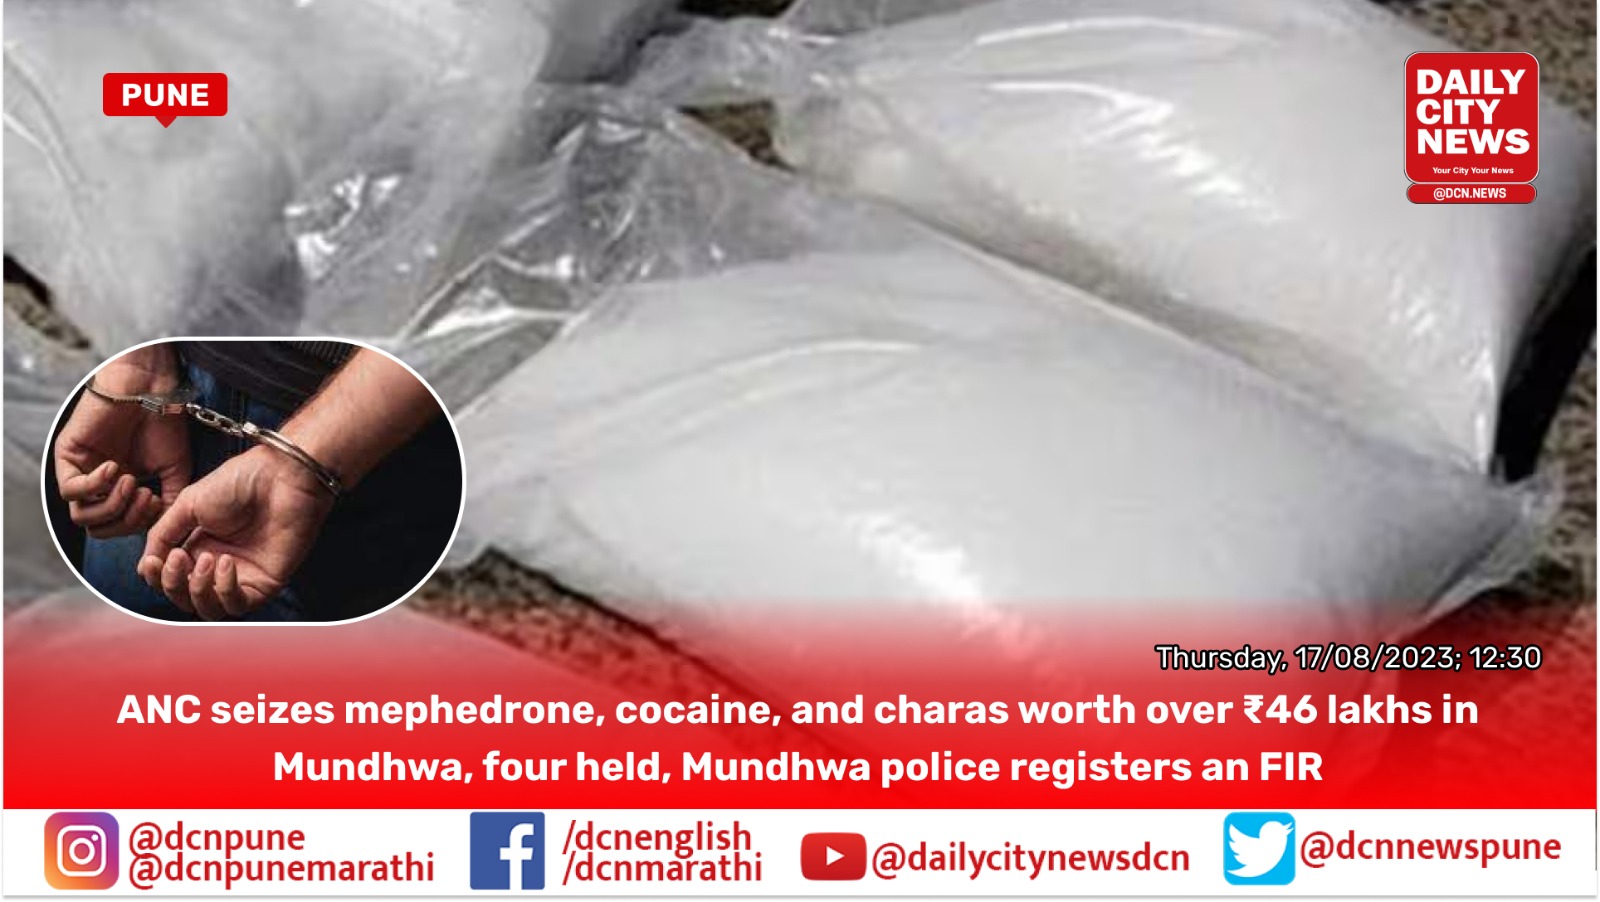 ANC seizes mephedrone, cocaine, and charas worth over ₹46 lakhs in Mundhwa, four held, Mundhwa police registers an FIR 